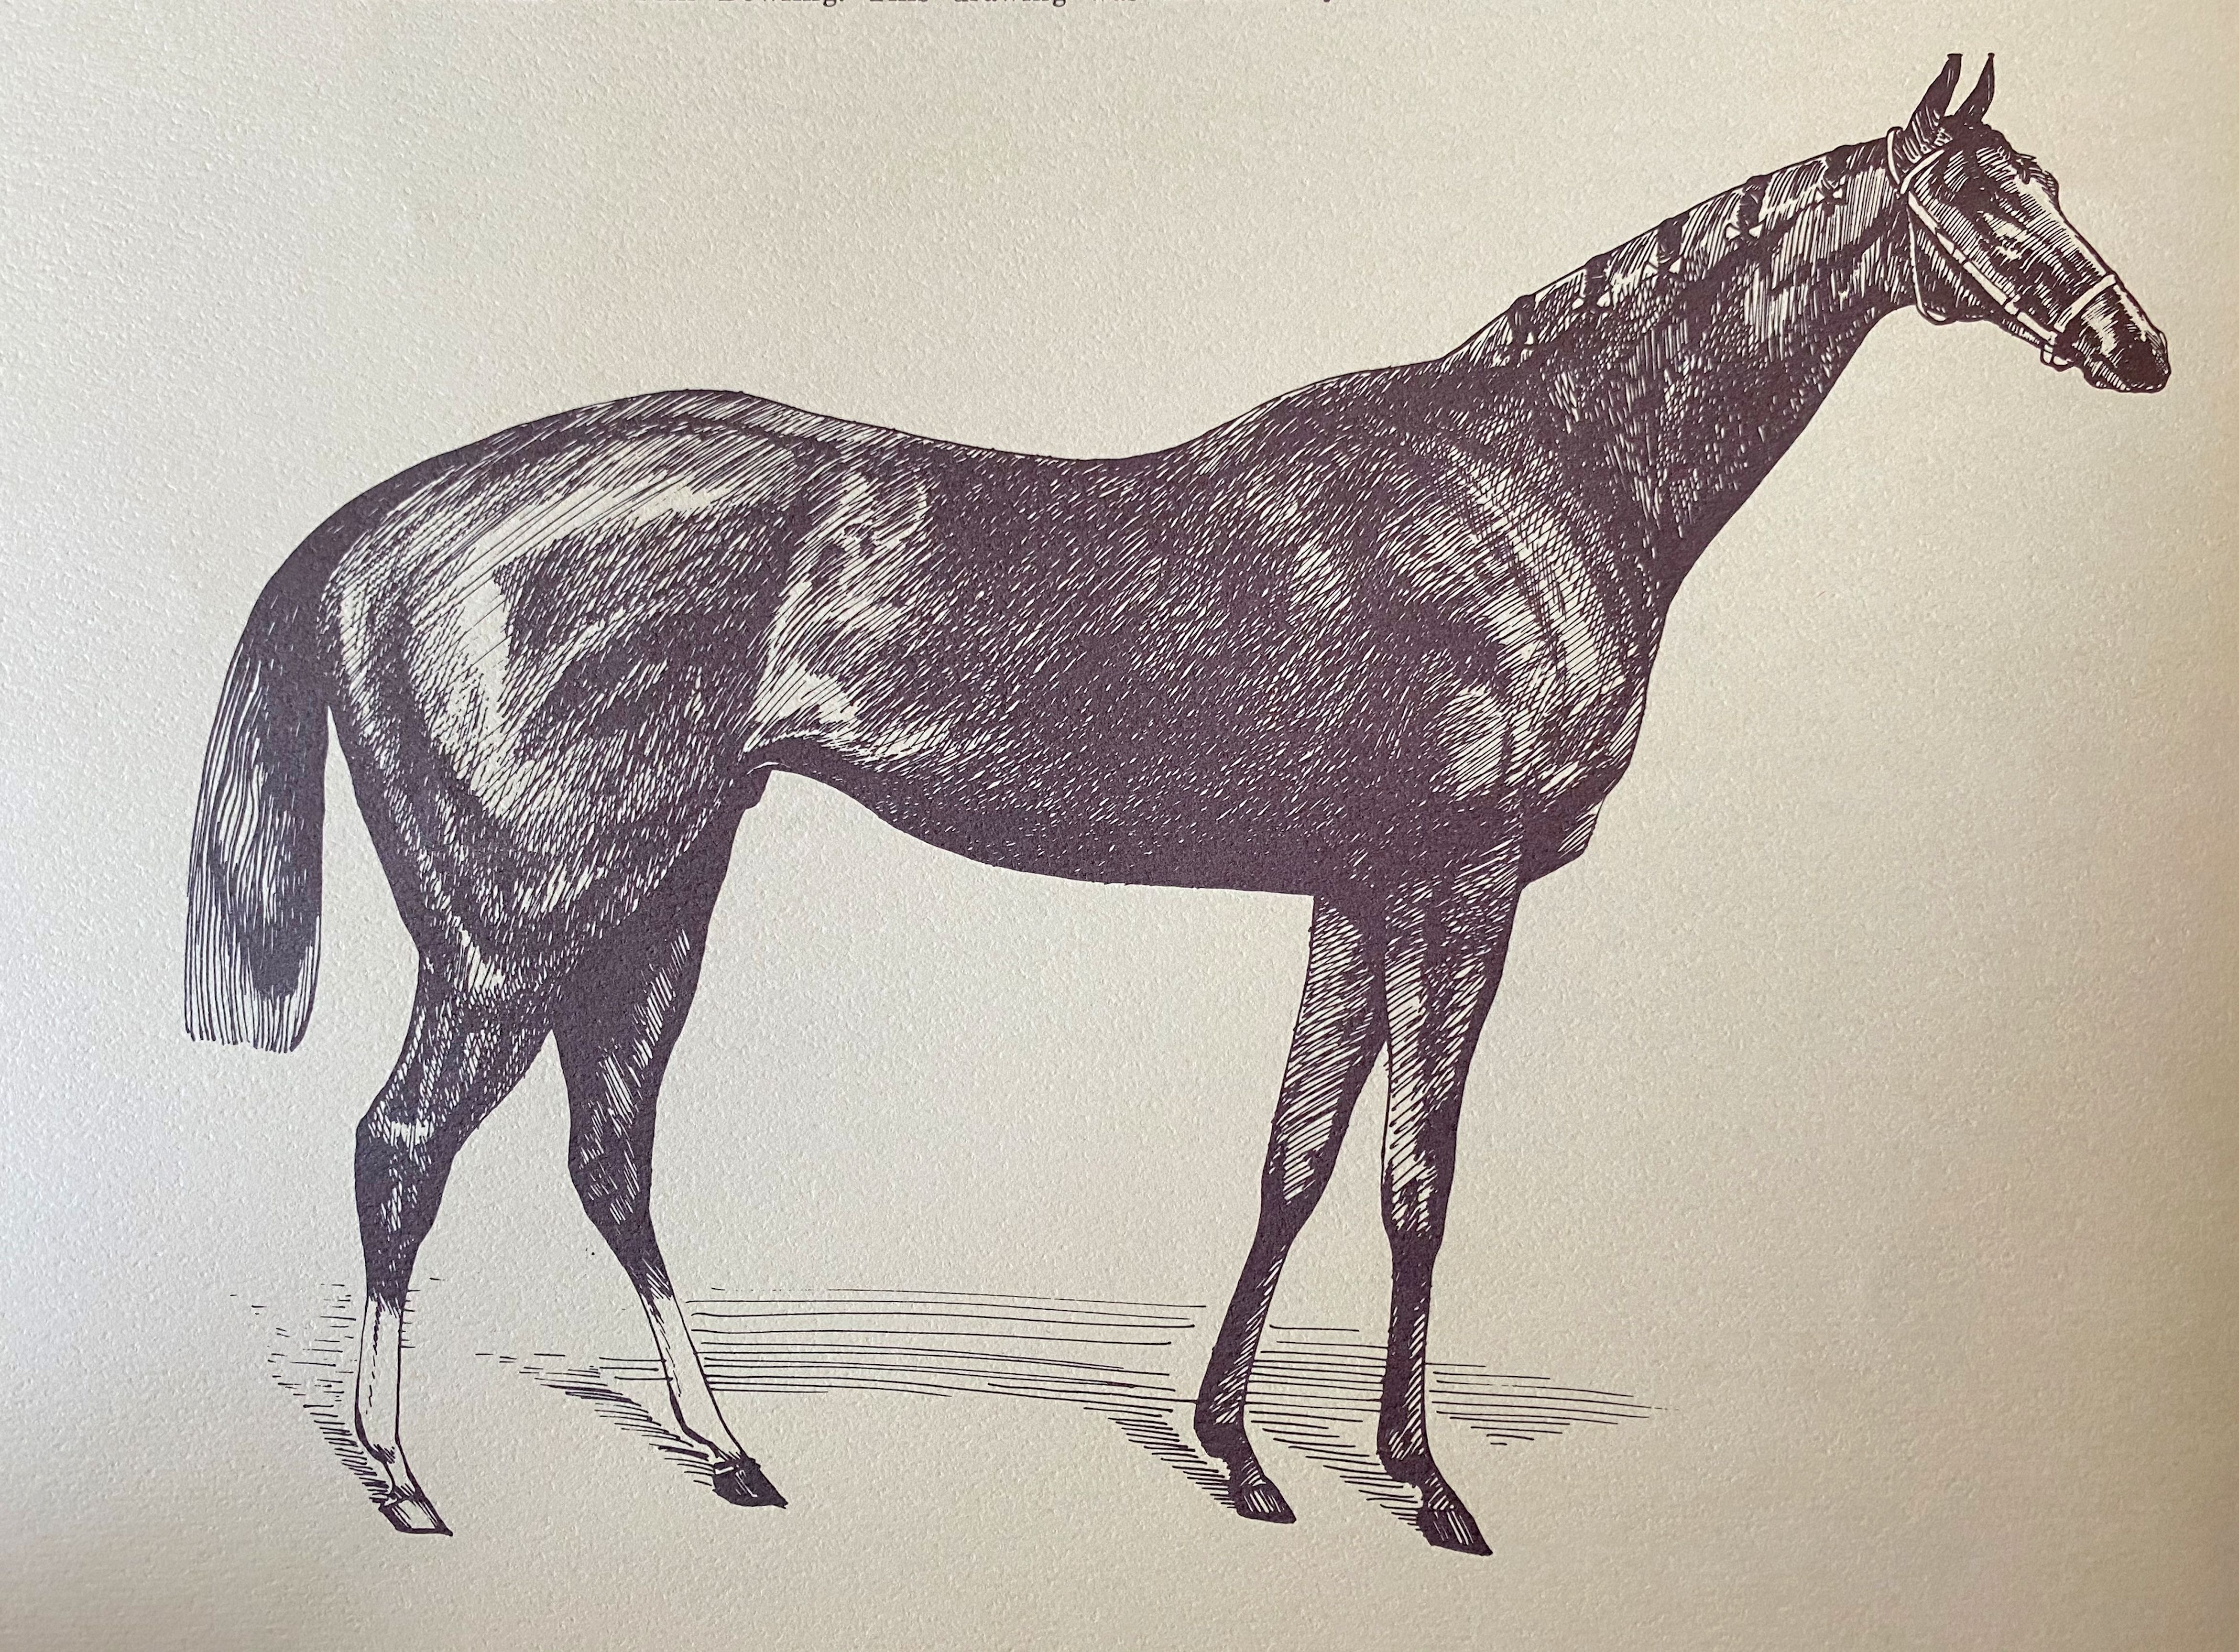 Illustration of Tom Bowling from "The Great Ones" (The BloodHorse)